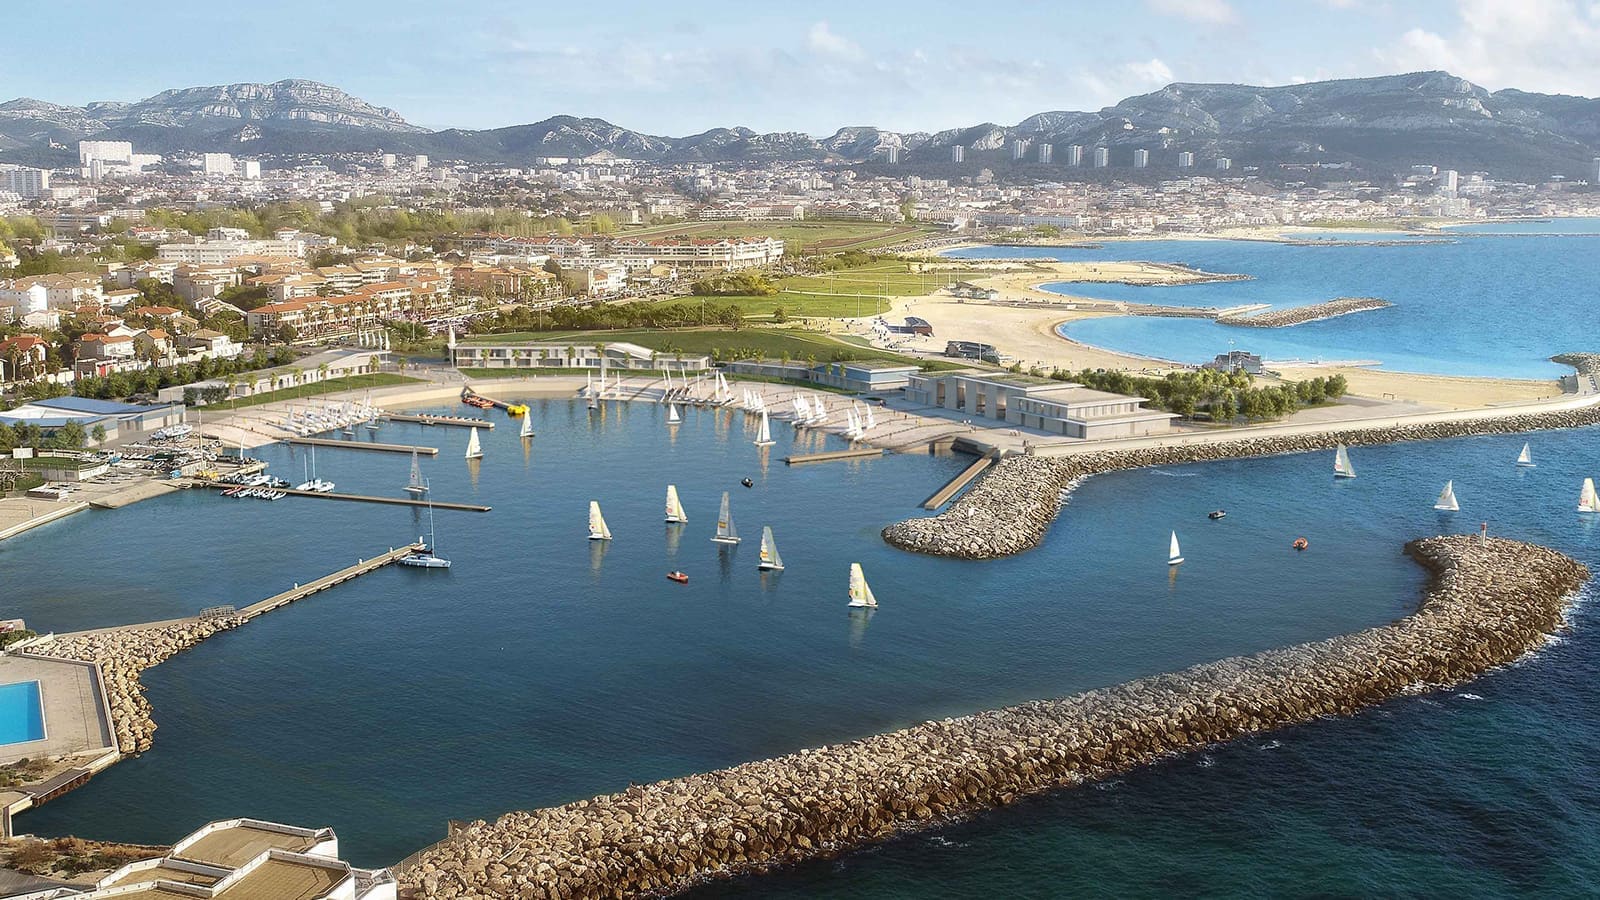 ROUCAS BLANC MARINA FOR 2024 OLYMPIC GAMES #1